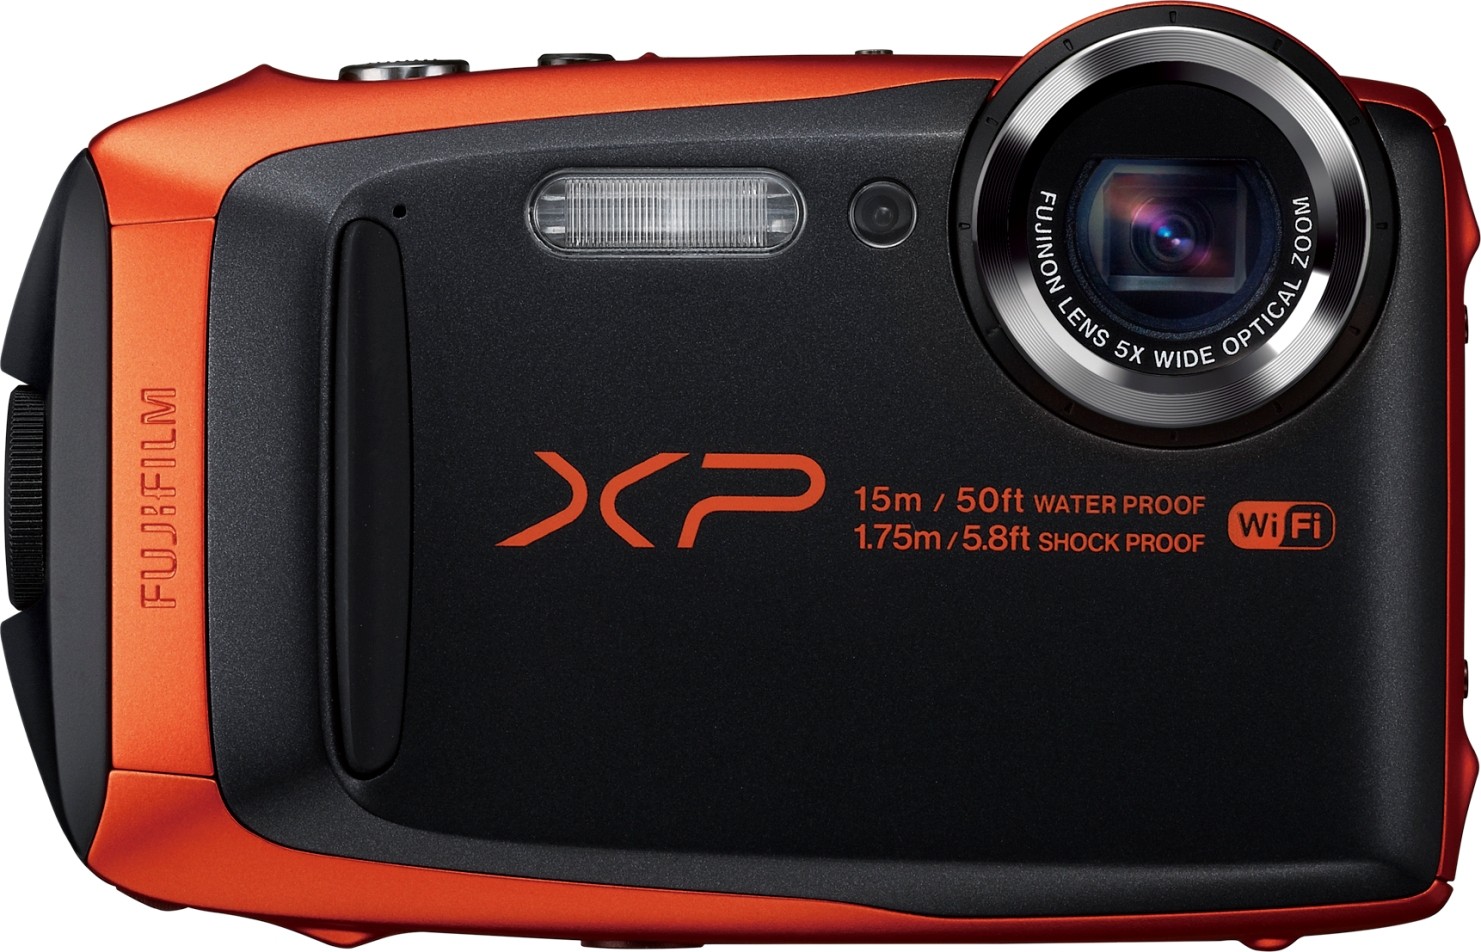 Fujifilm's FinePix XP90 reminds users that a real camera still takes some beating. – AFP Relaxnews pic, January 17, 2016.